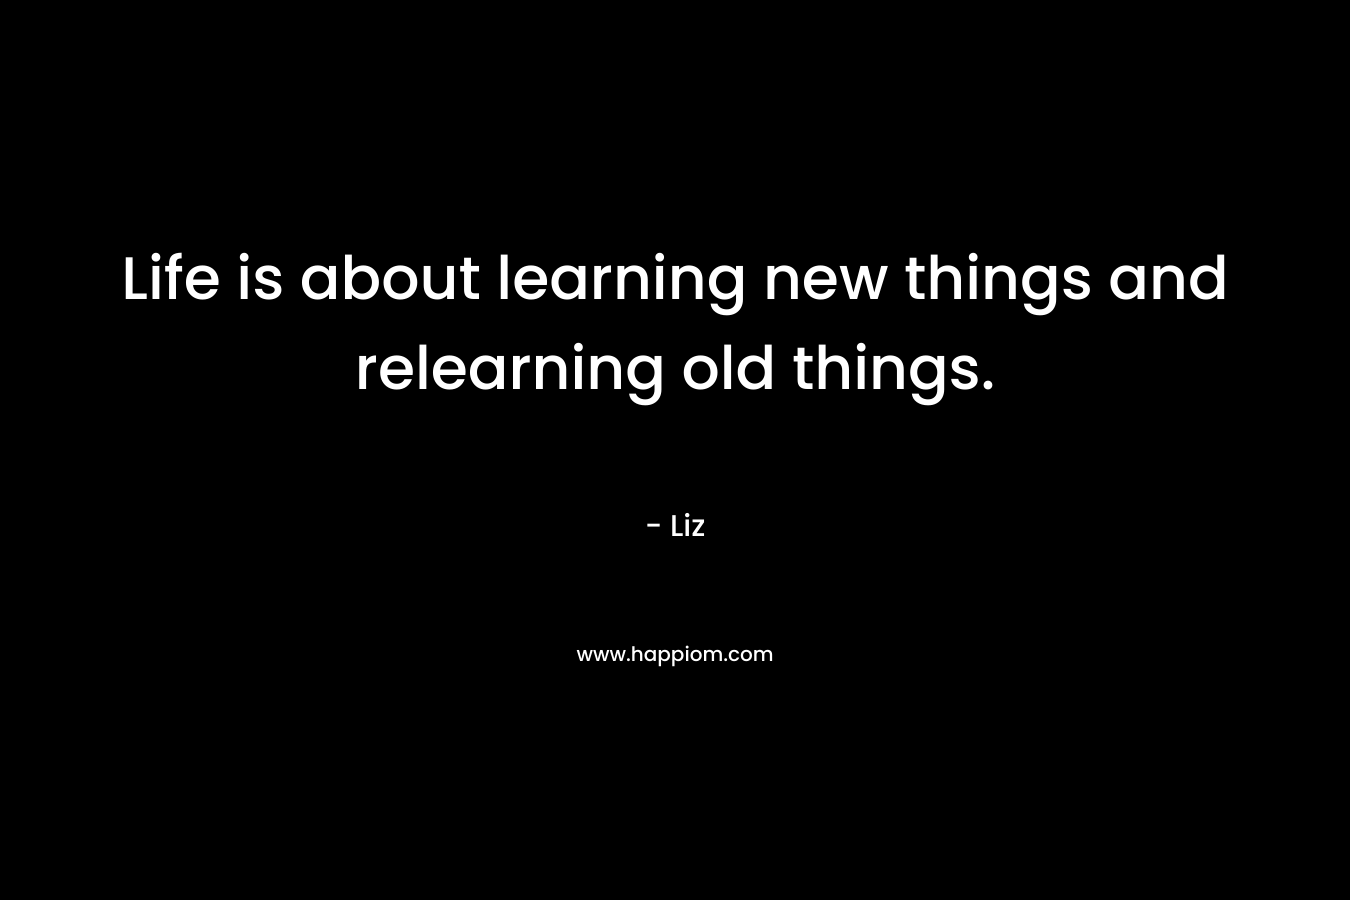 Life is about learning new things and relearning old things. – Liz